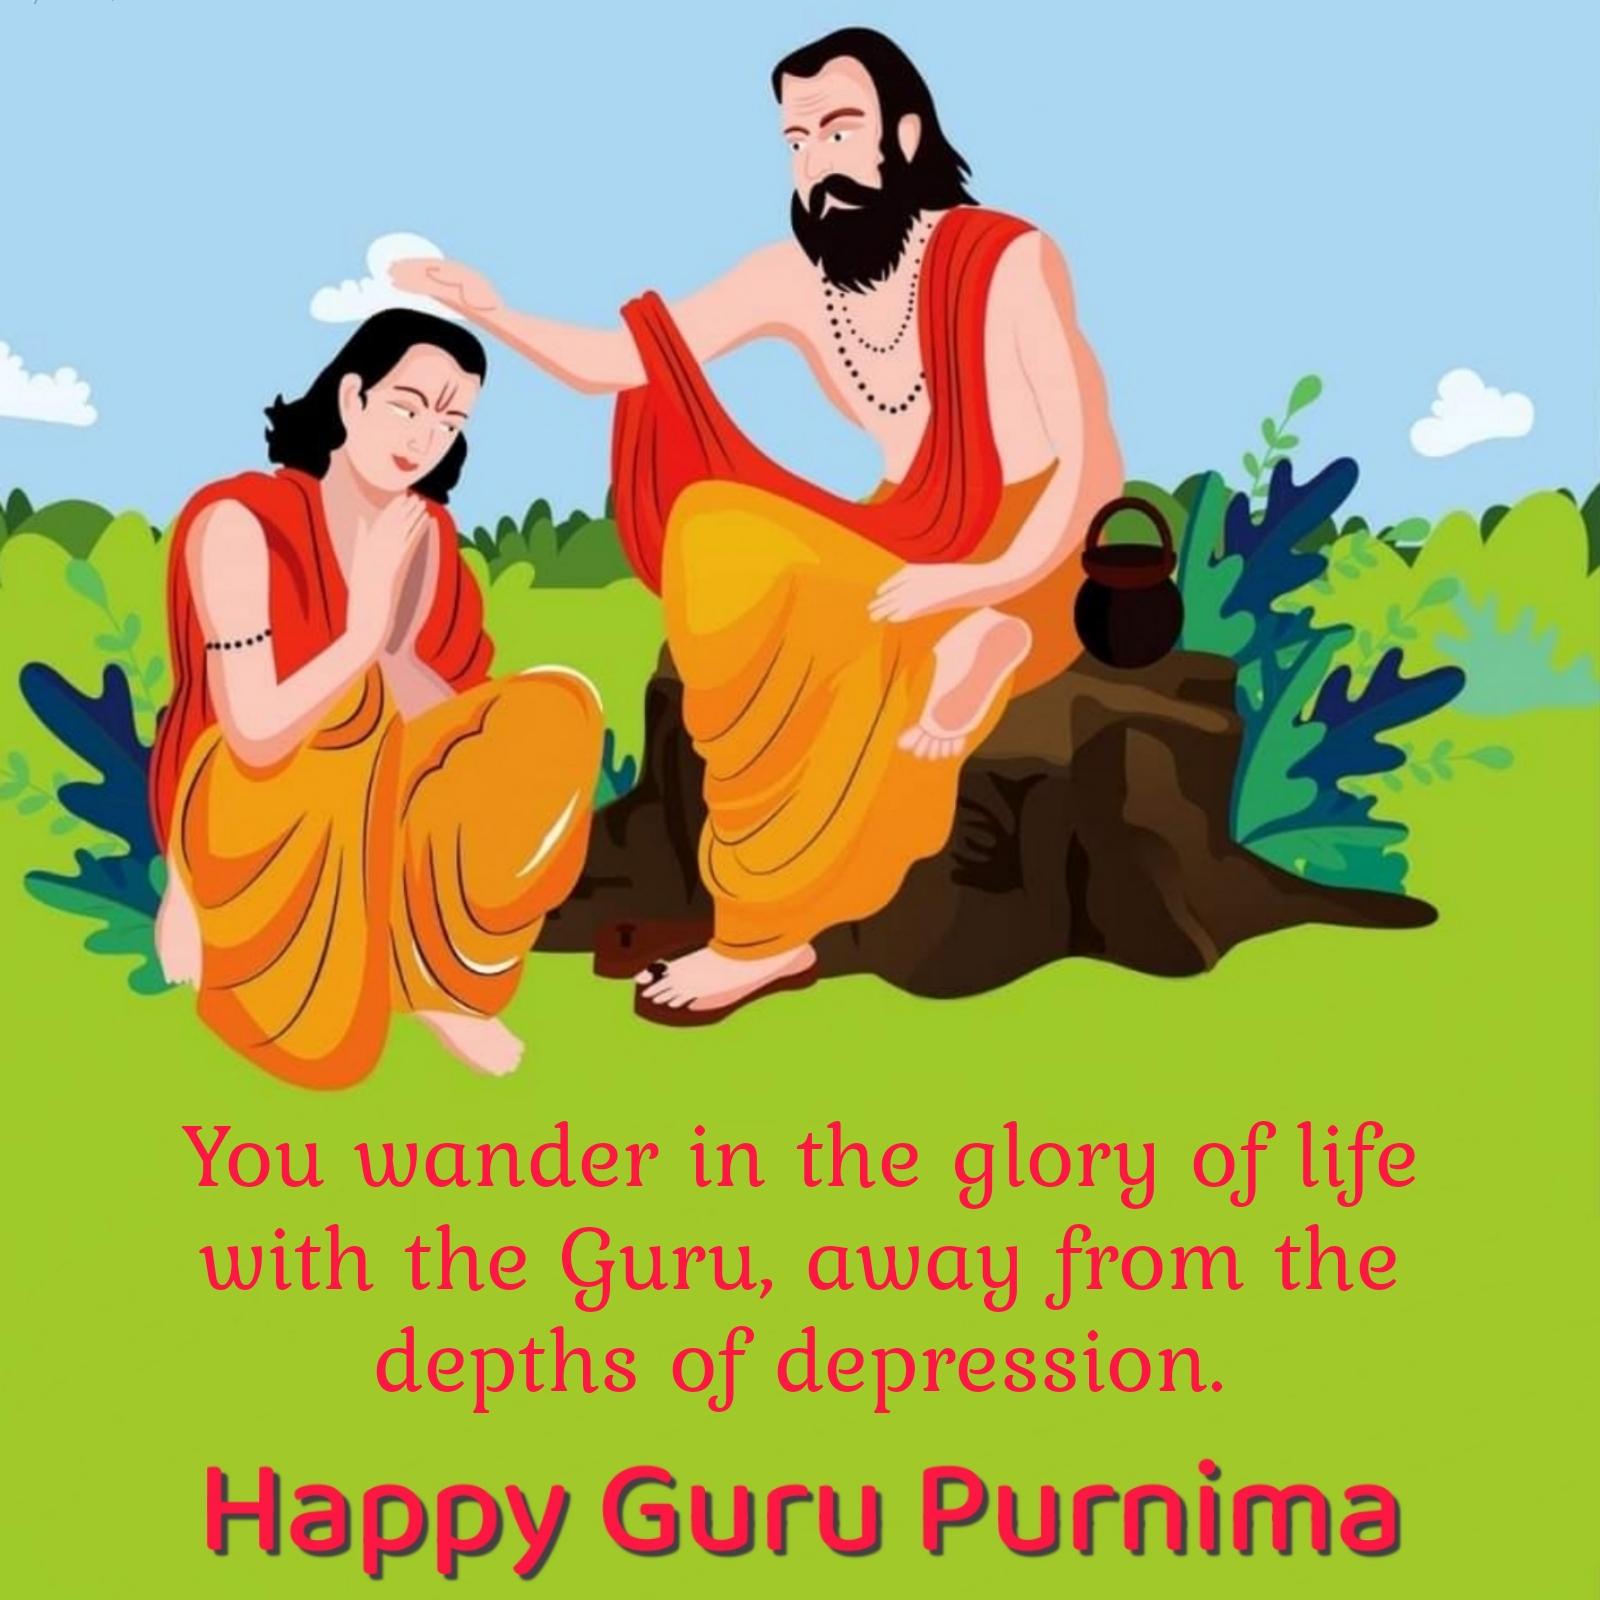 You wander in the glory of life with the Guru away from the depths of depression